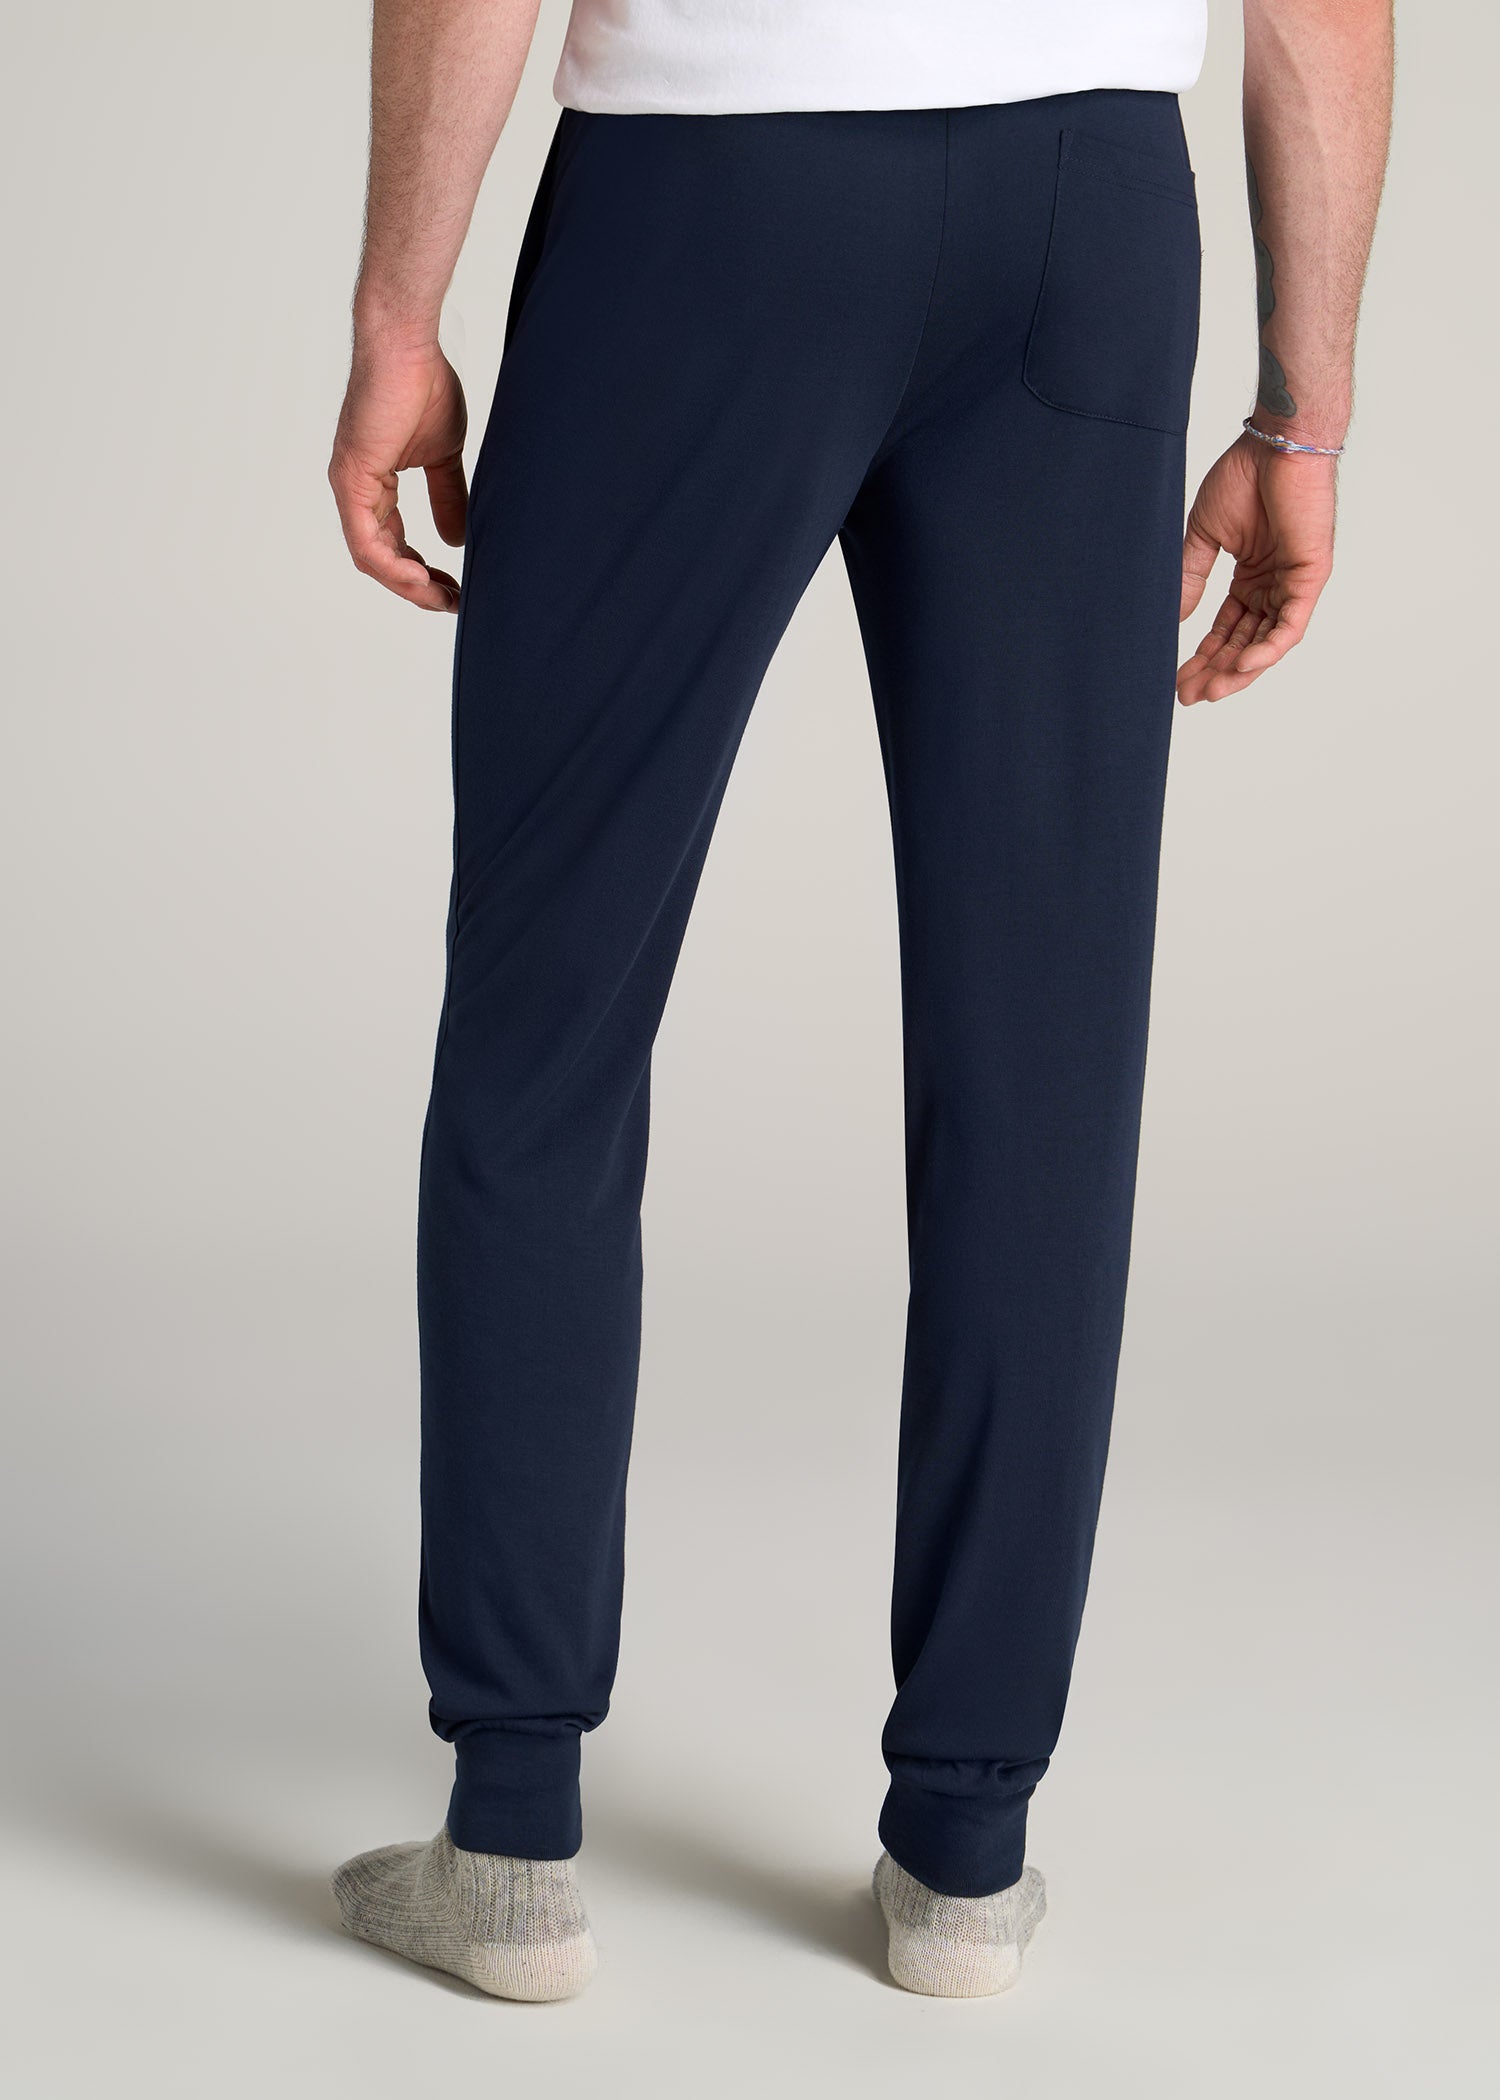 American-Tall-Men-Lounge-Pant-Joggers-Navy-back